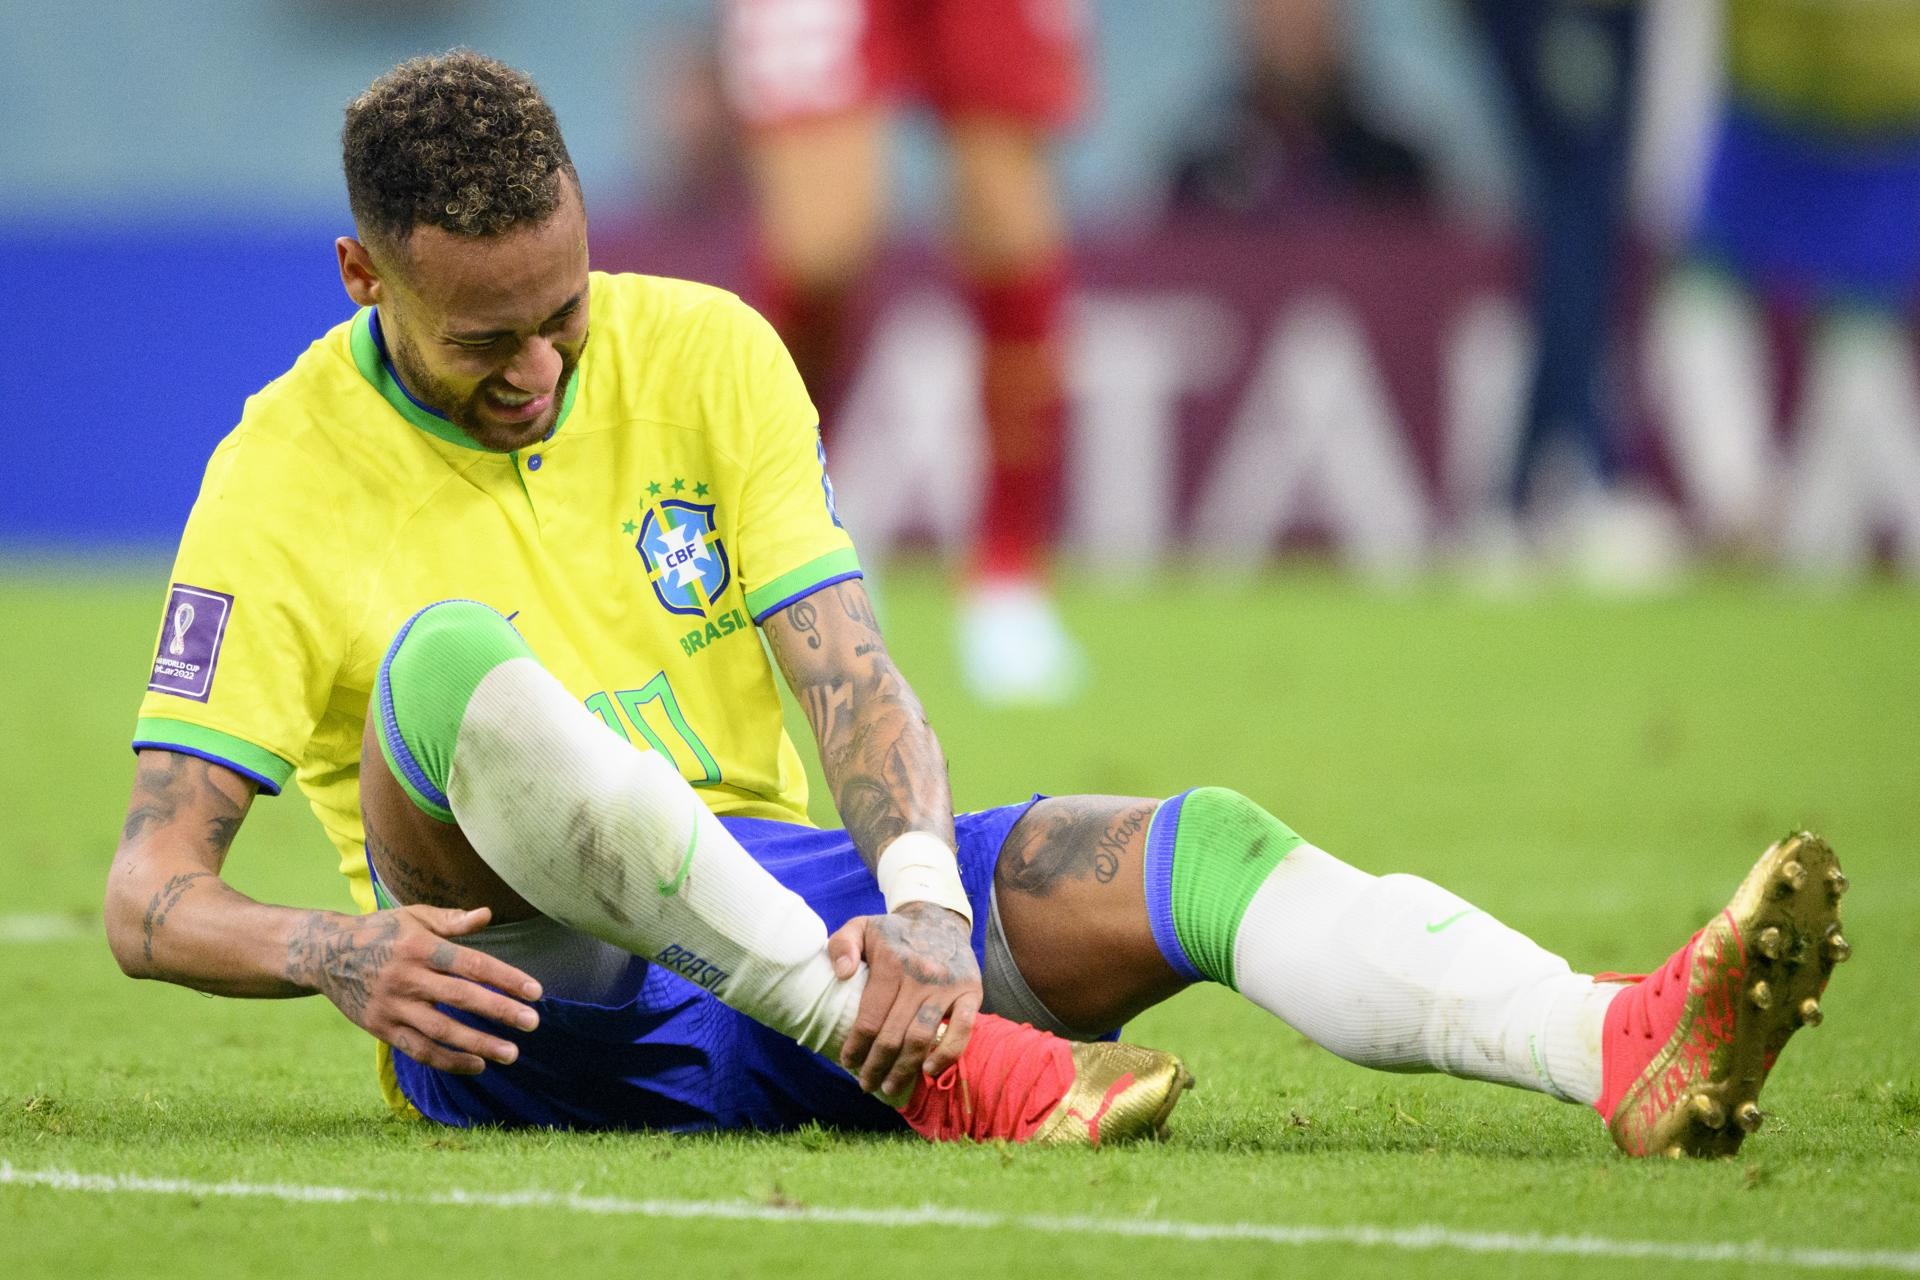 Brazil face anxious wait after Neymar injury scare at WC